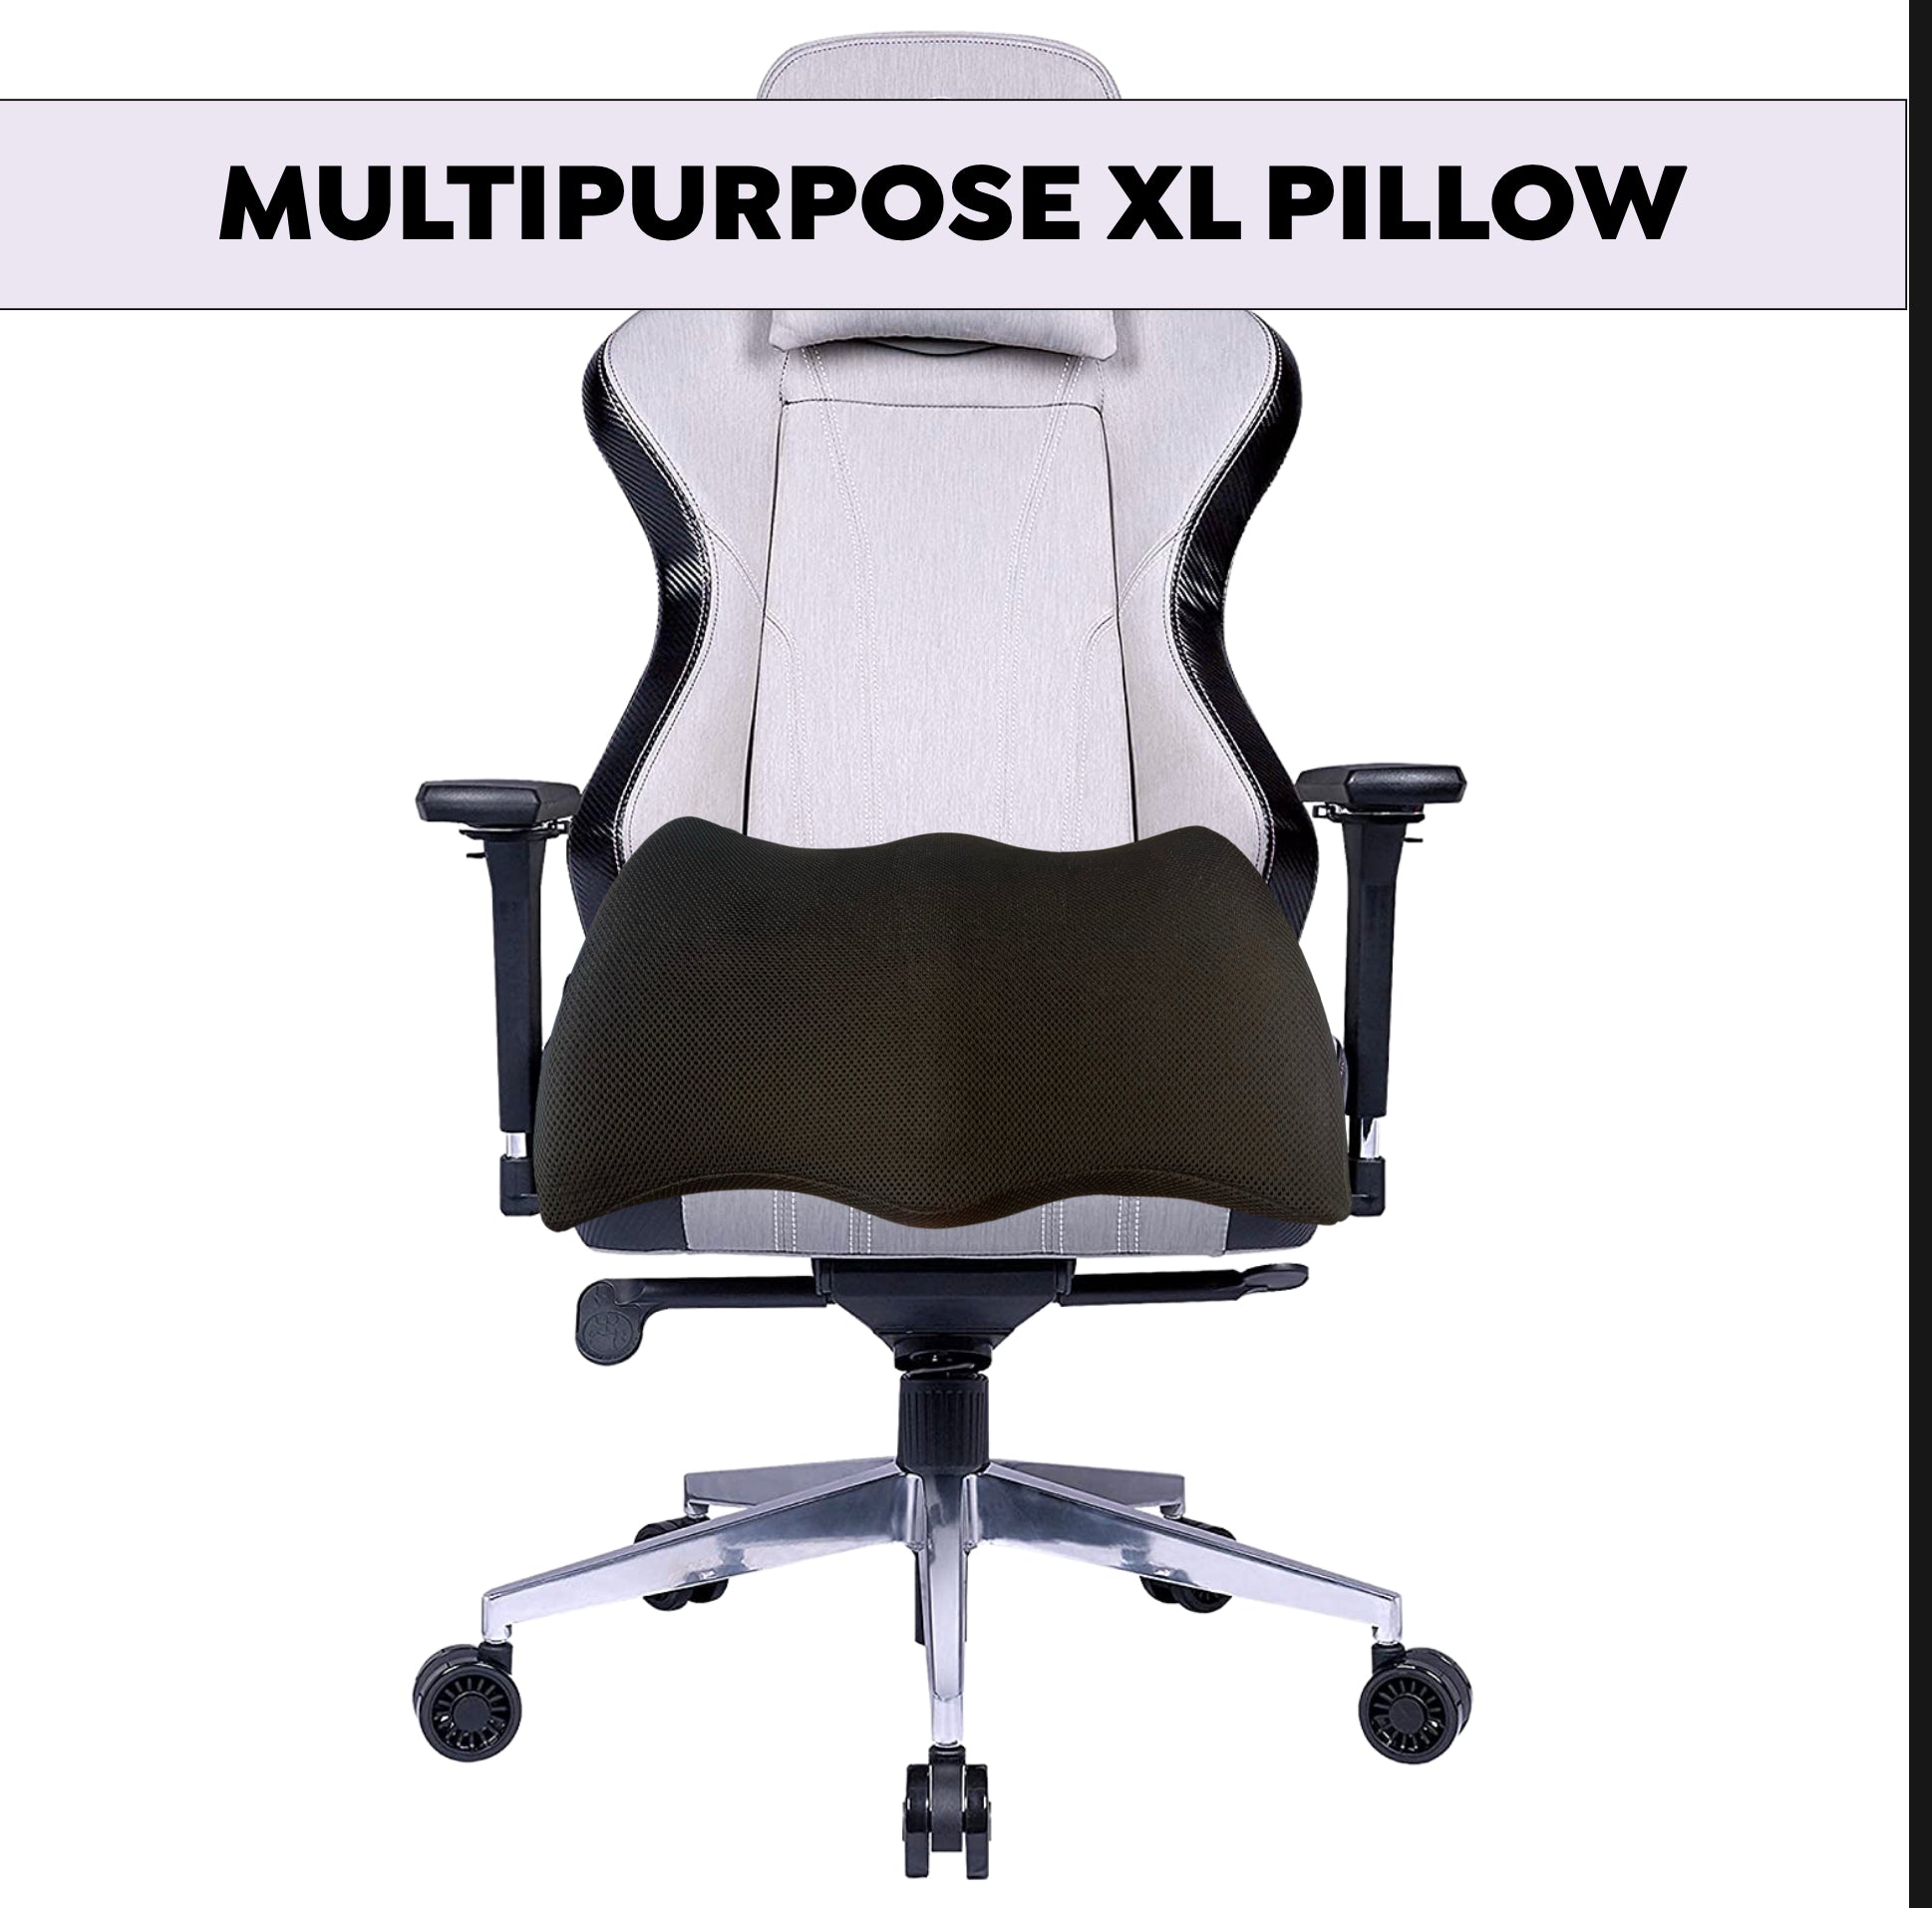 BBL Pillow for The Car, Gaming Chair Pillow, Multipurpose Pillow by Bombshell Booty Pillow